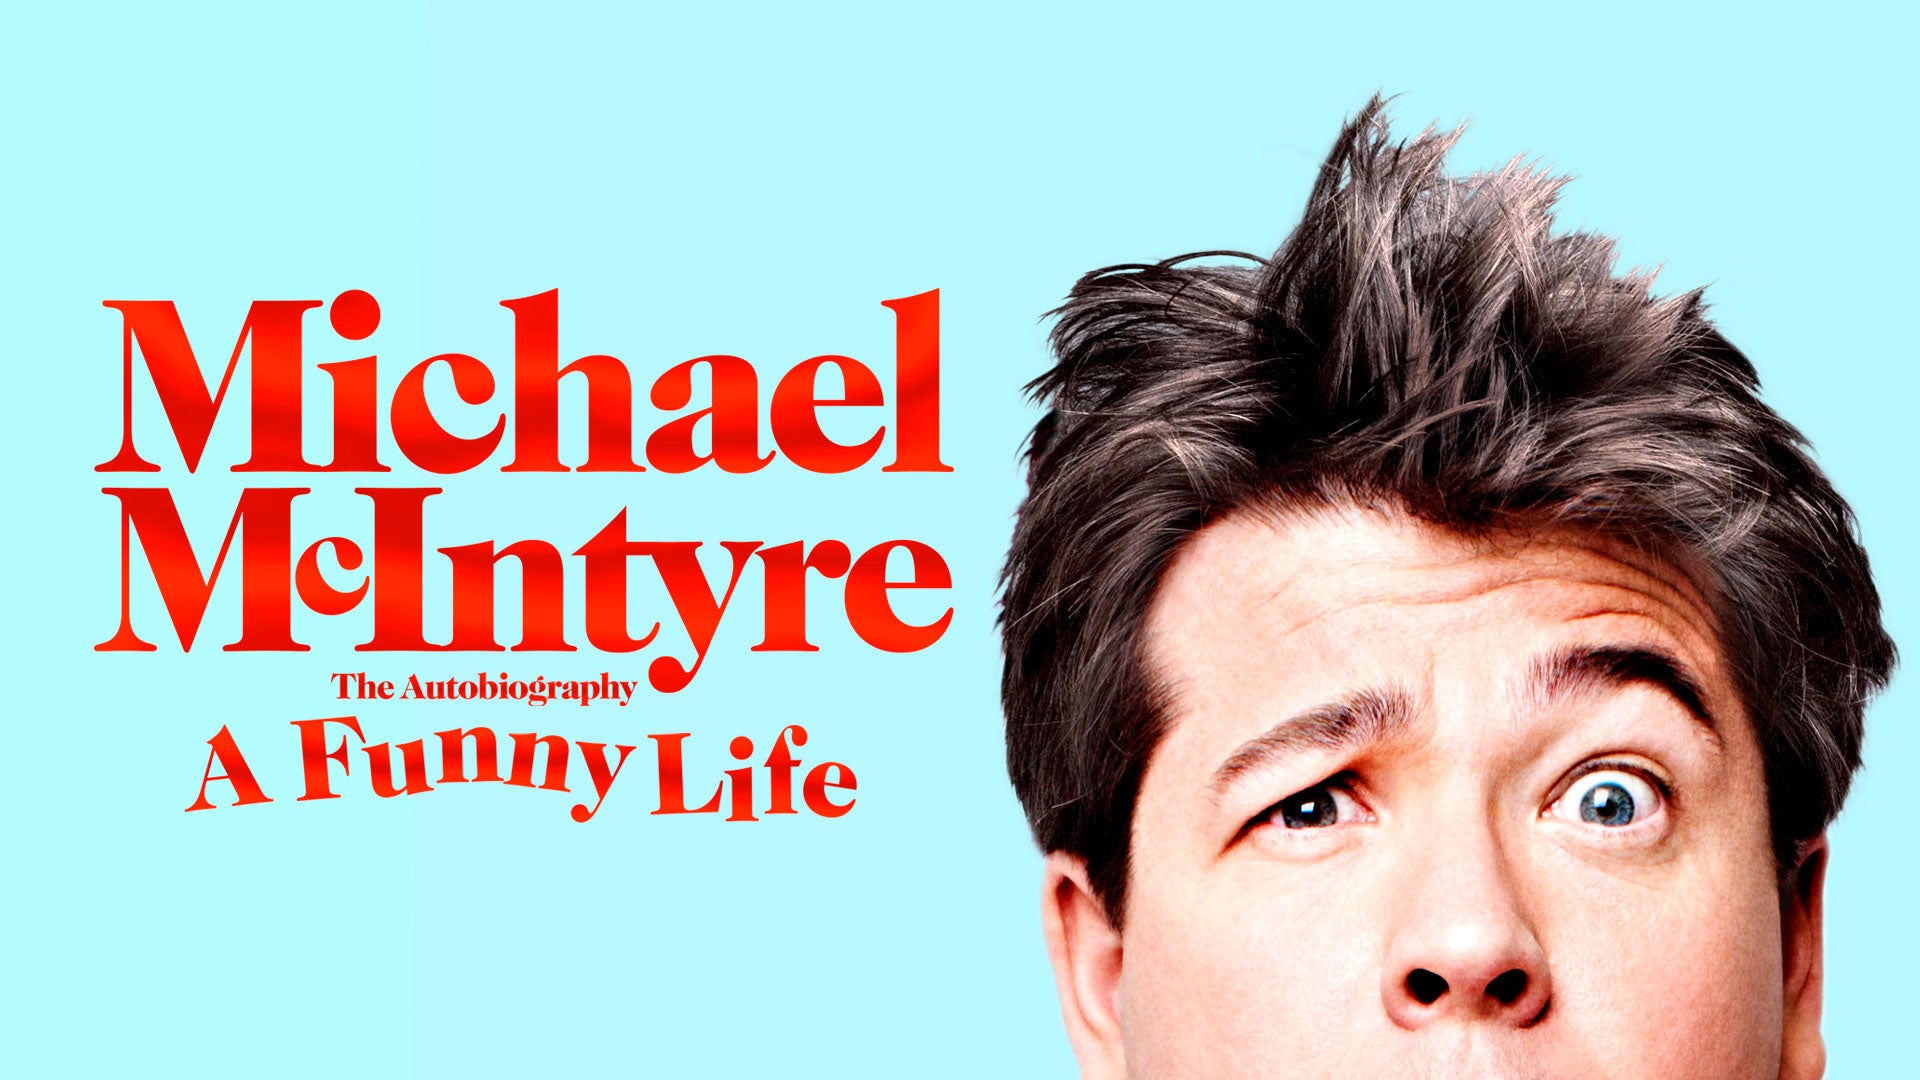 Half of Michael McIntyre's confused face can be seen on a blue background, next to the words 'Michael McIntyre The Autobiography A Funny Life'